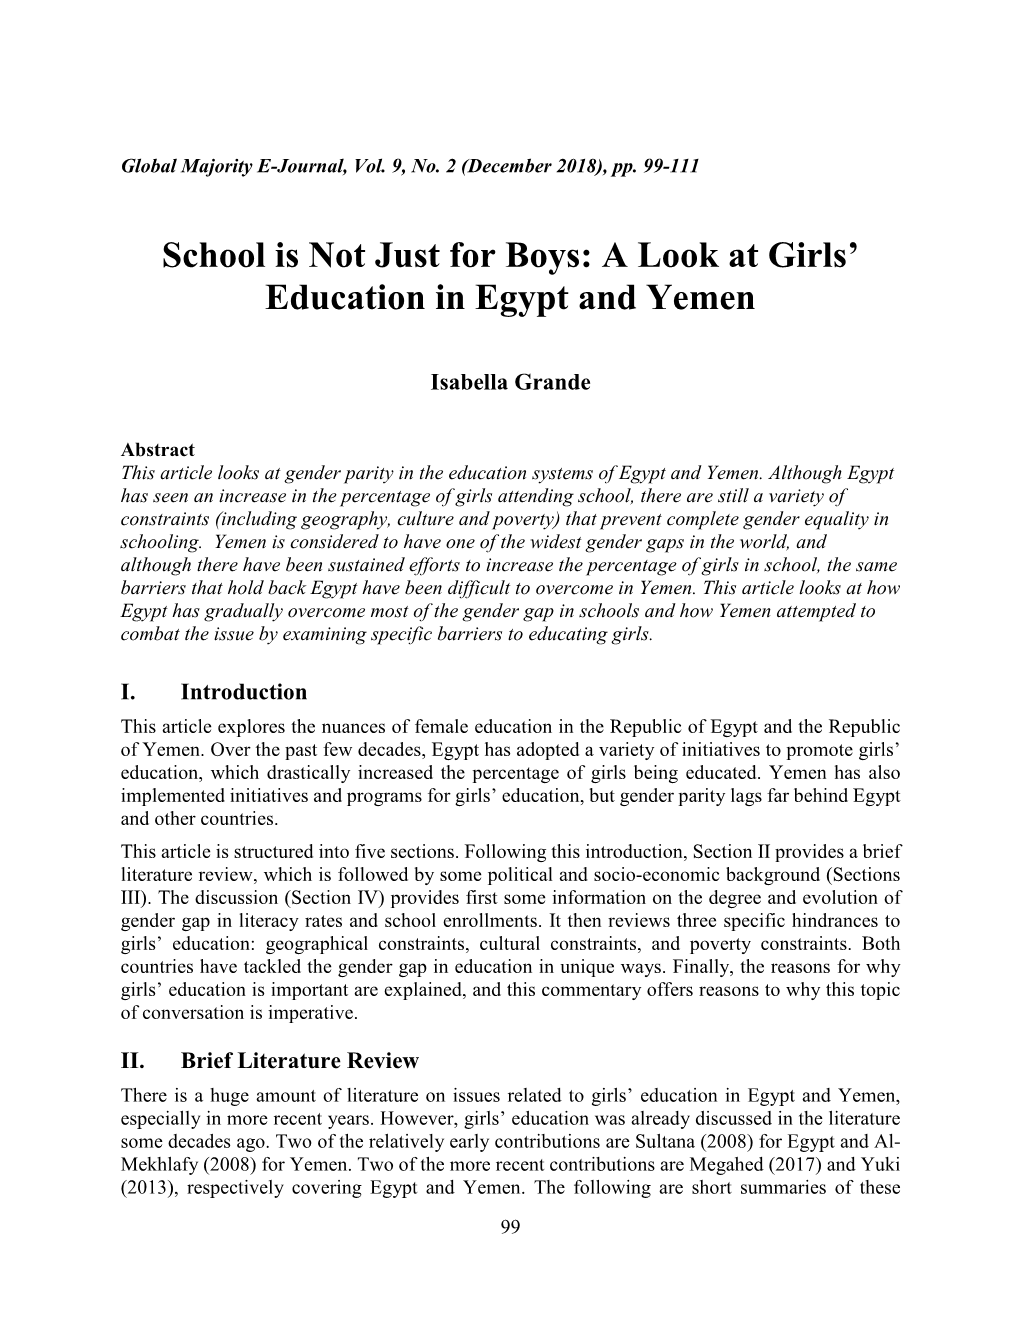 School Is Not Just for Boys: a Look at Girls' Education in Egypt and Yemen